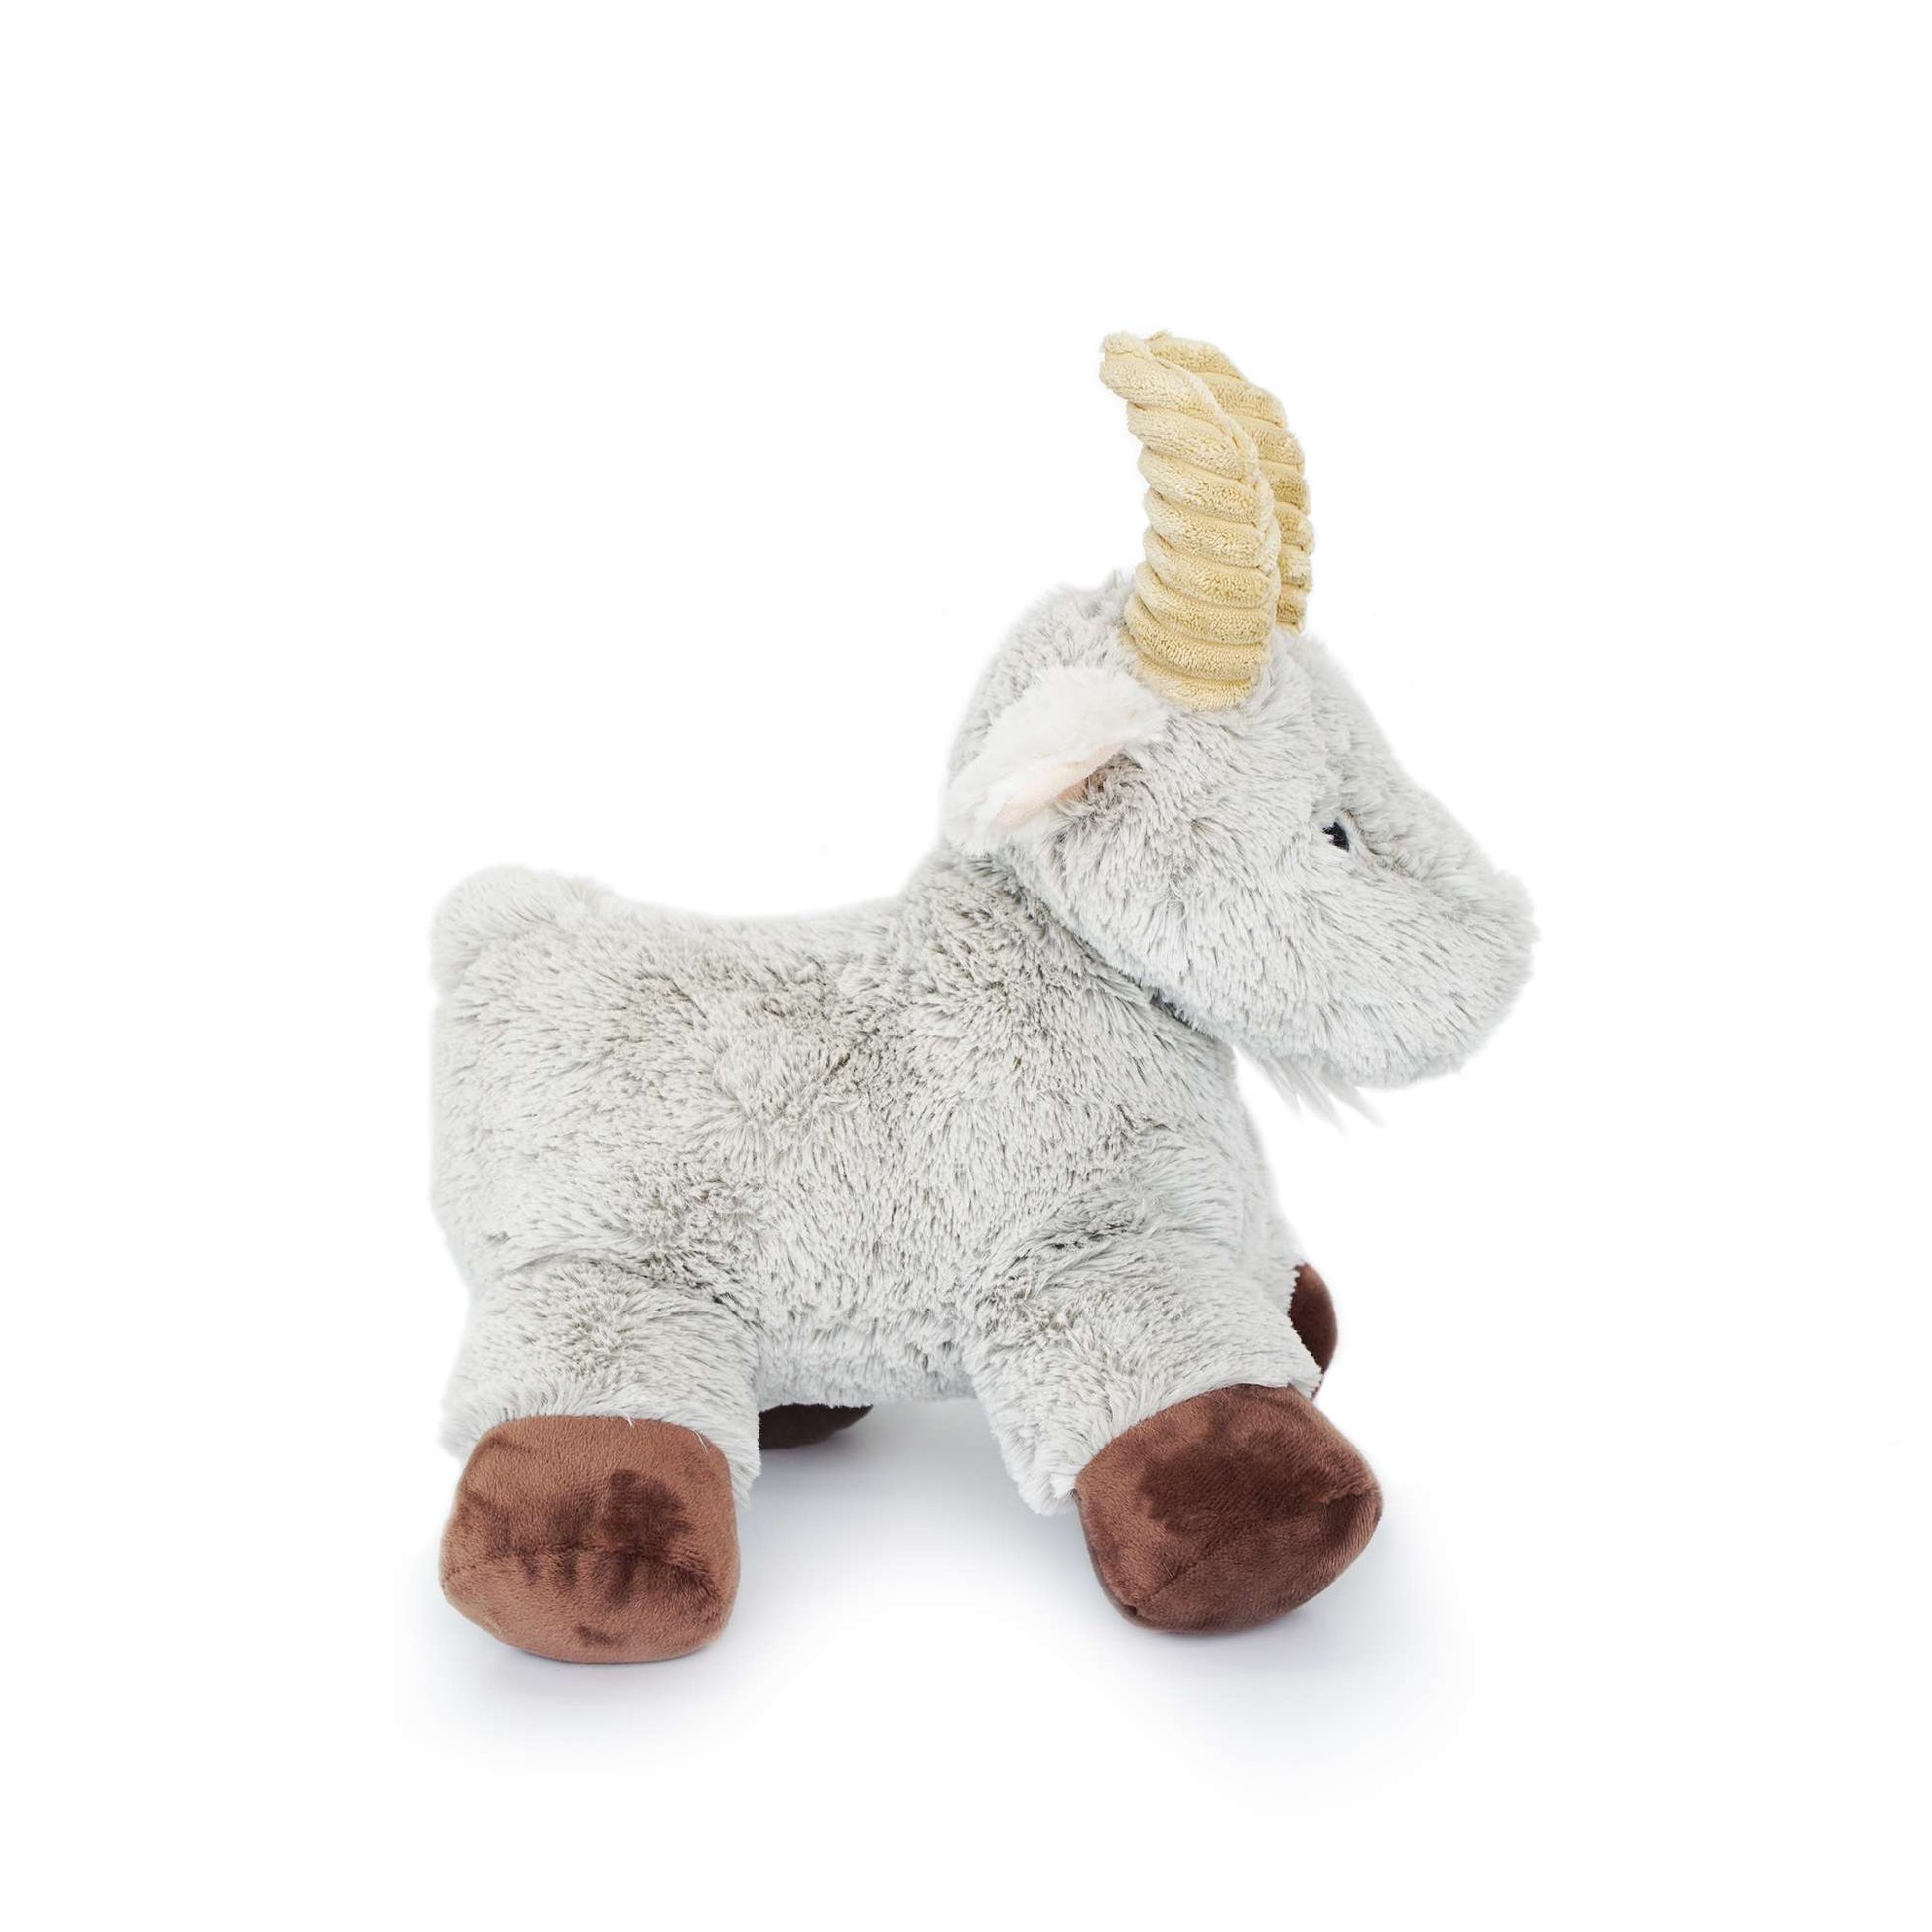 Outline side view grey goat stuffed animal PlushThis